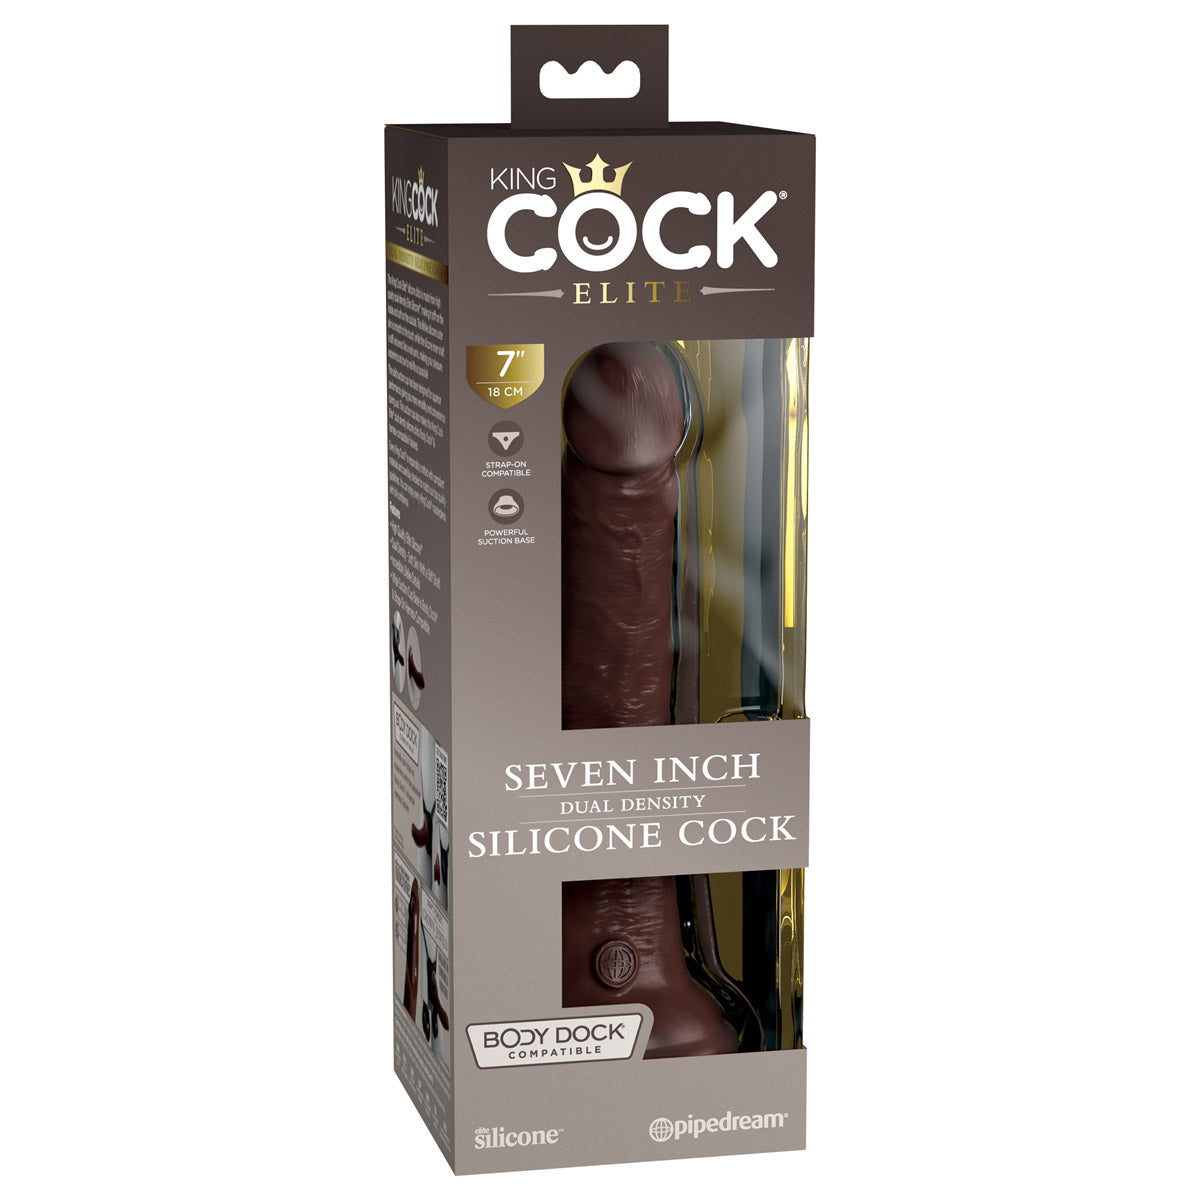 King Cock Elite 7" Silicone Dual Density Cock - Brown - Thorn & Feather